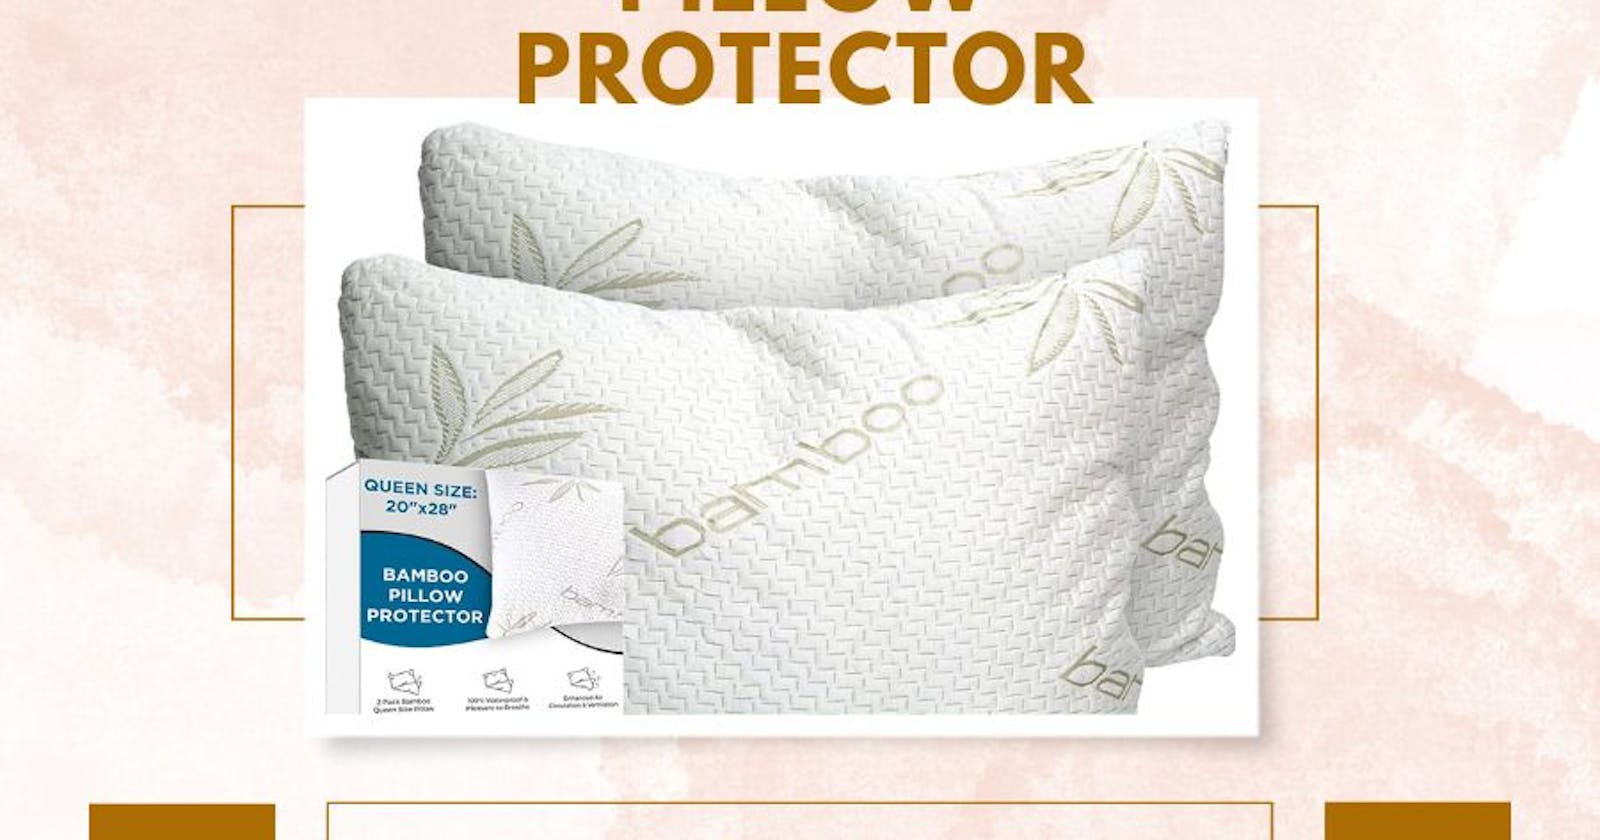 Will Bamboo Pillow Protector Protect My Pillow From Stains?